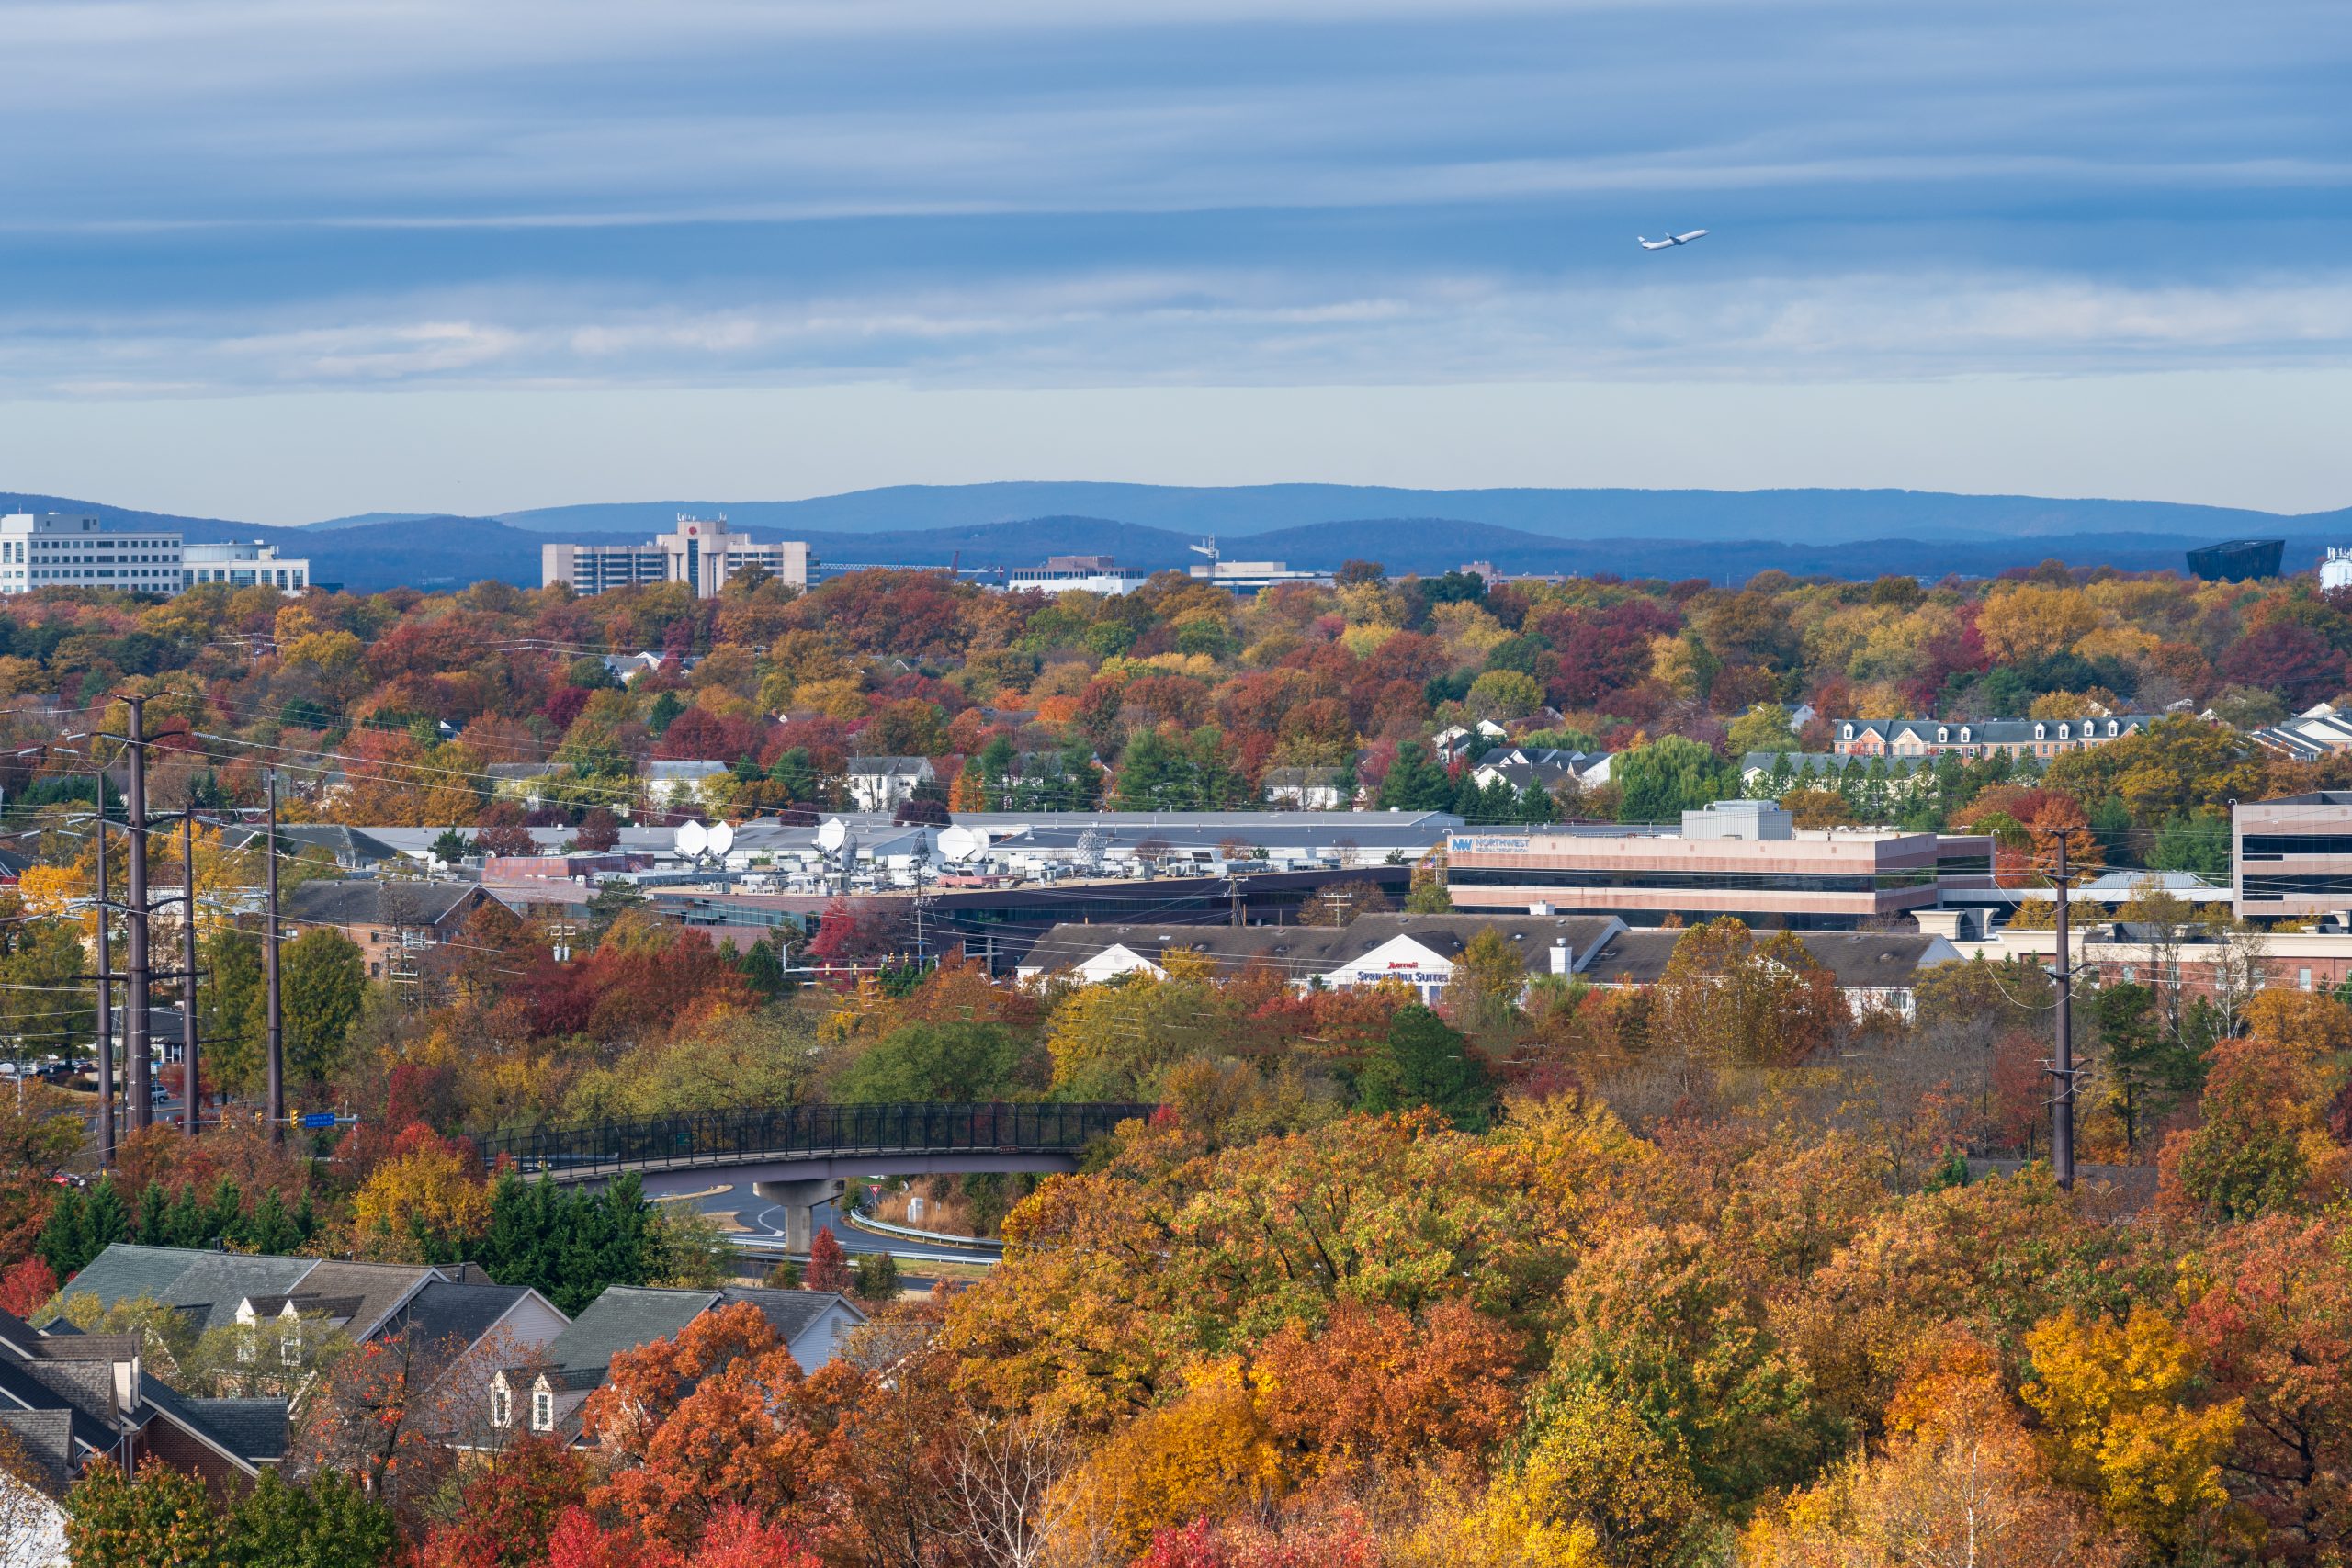 A landscape photo looks out over the lush scenery of Reston Virginia to the Blue Ridge Mountains as the seasons change; a plane in the sky is from Dulles Airport.